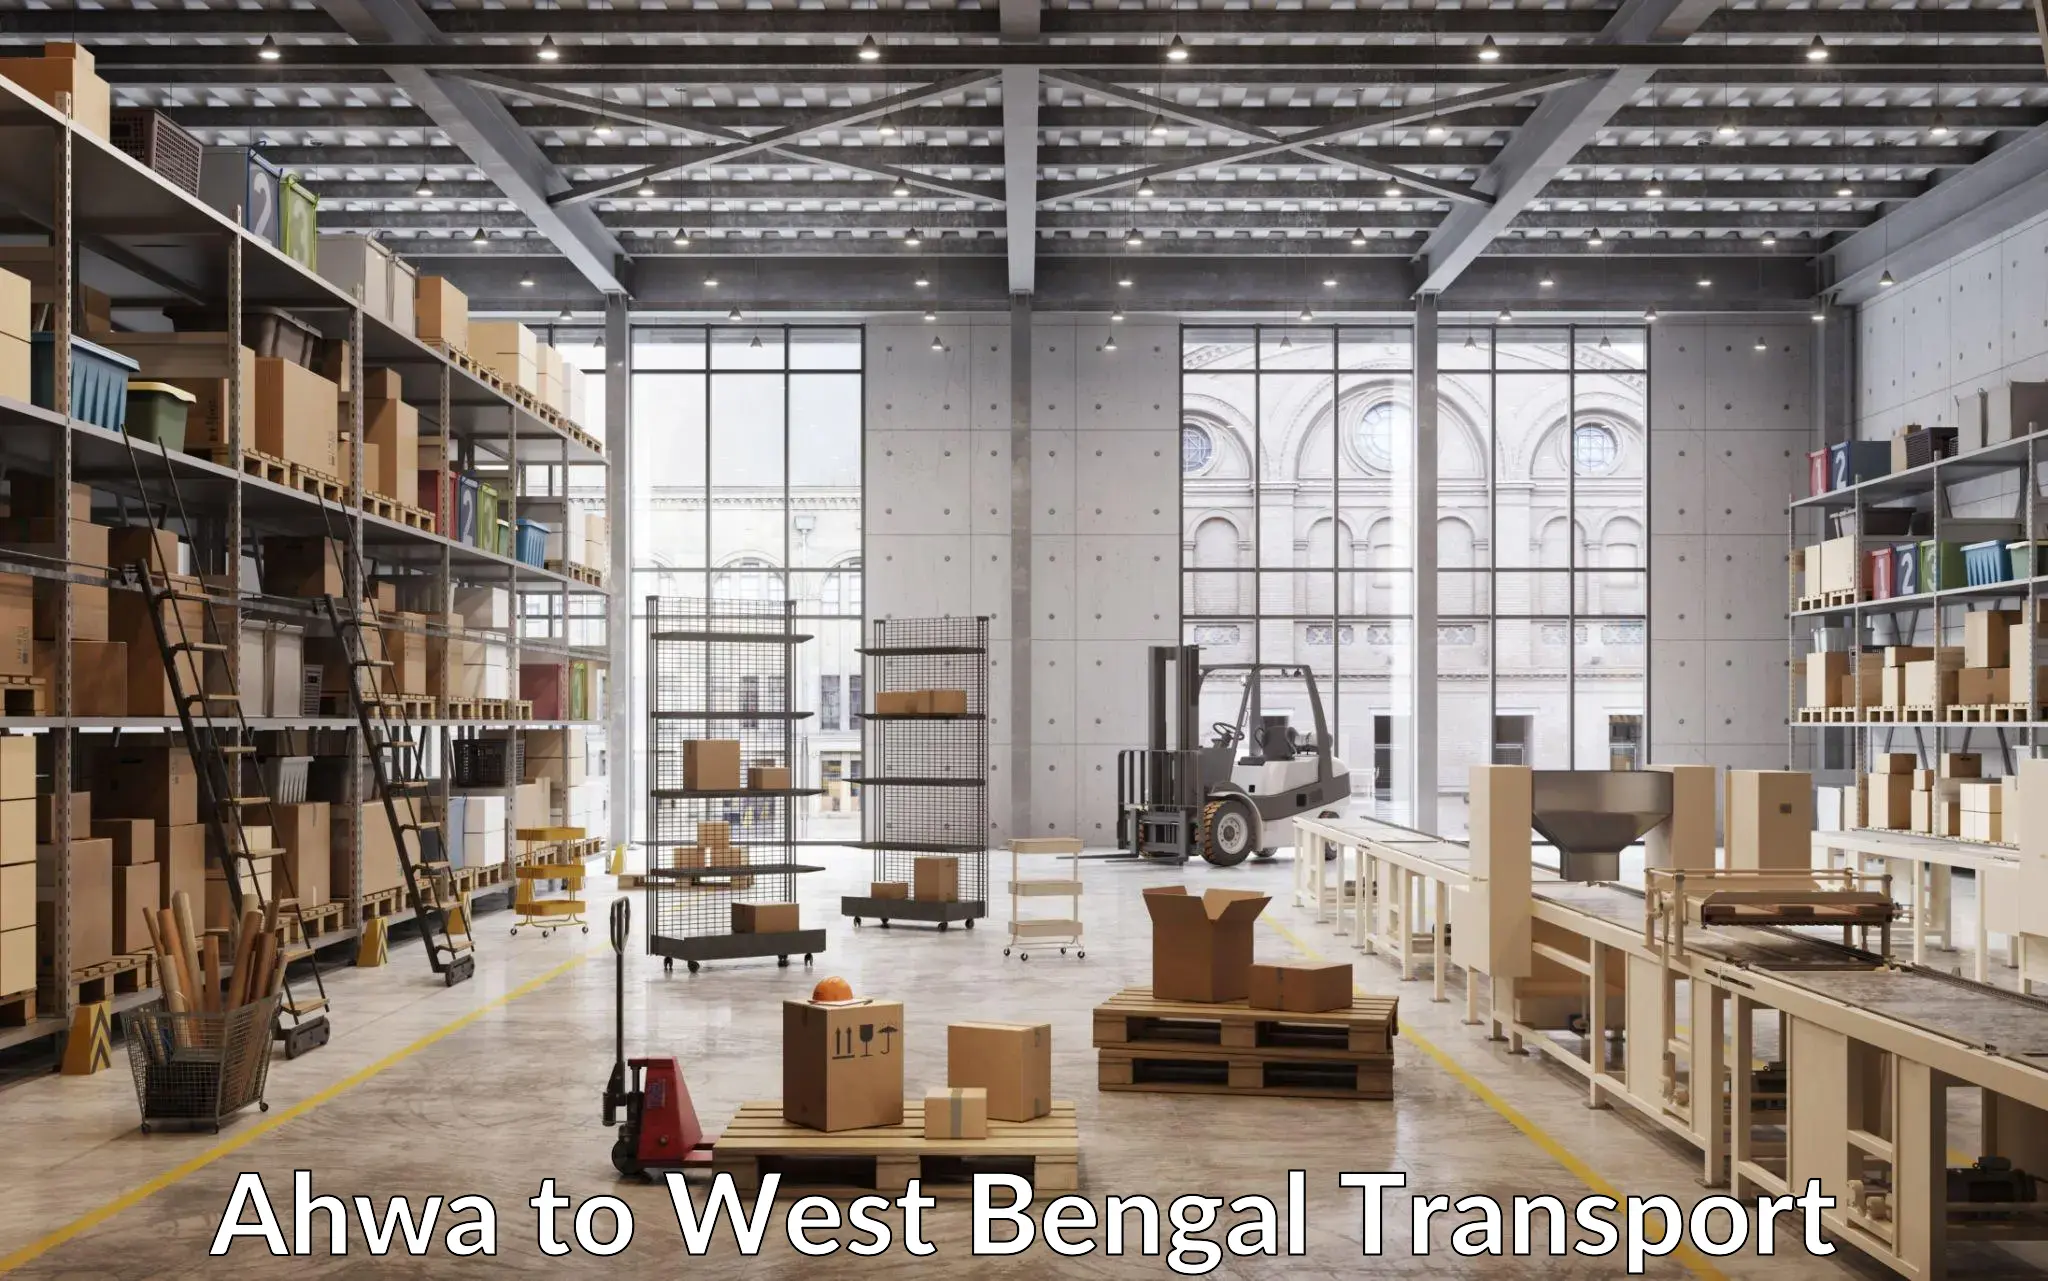 Express transport services in Ahwa to Asansol